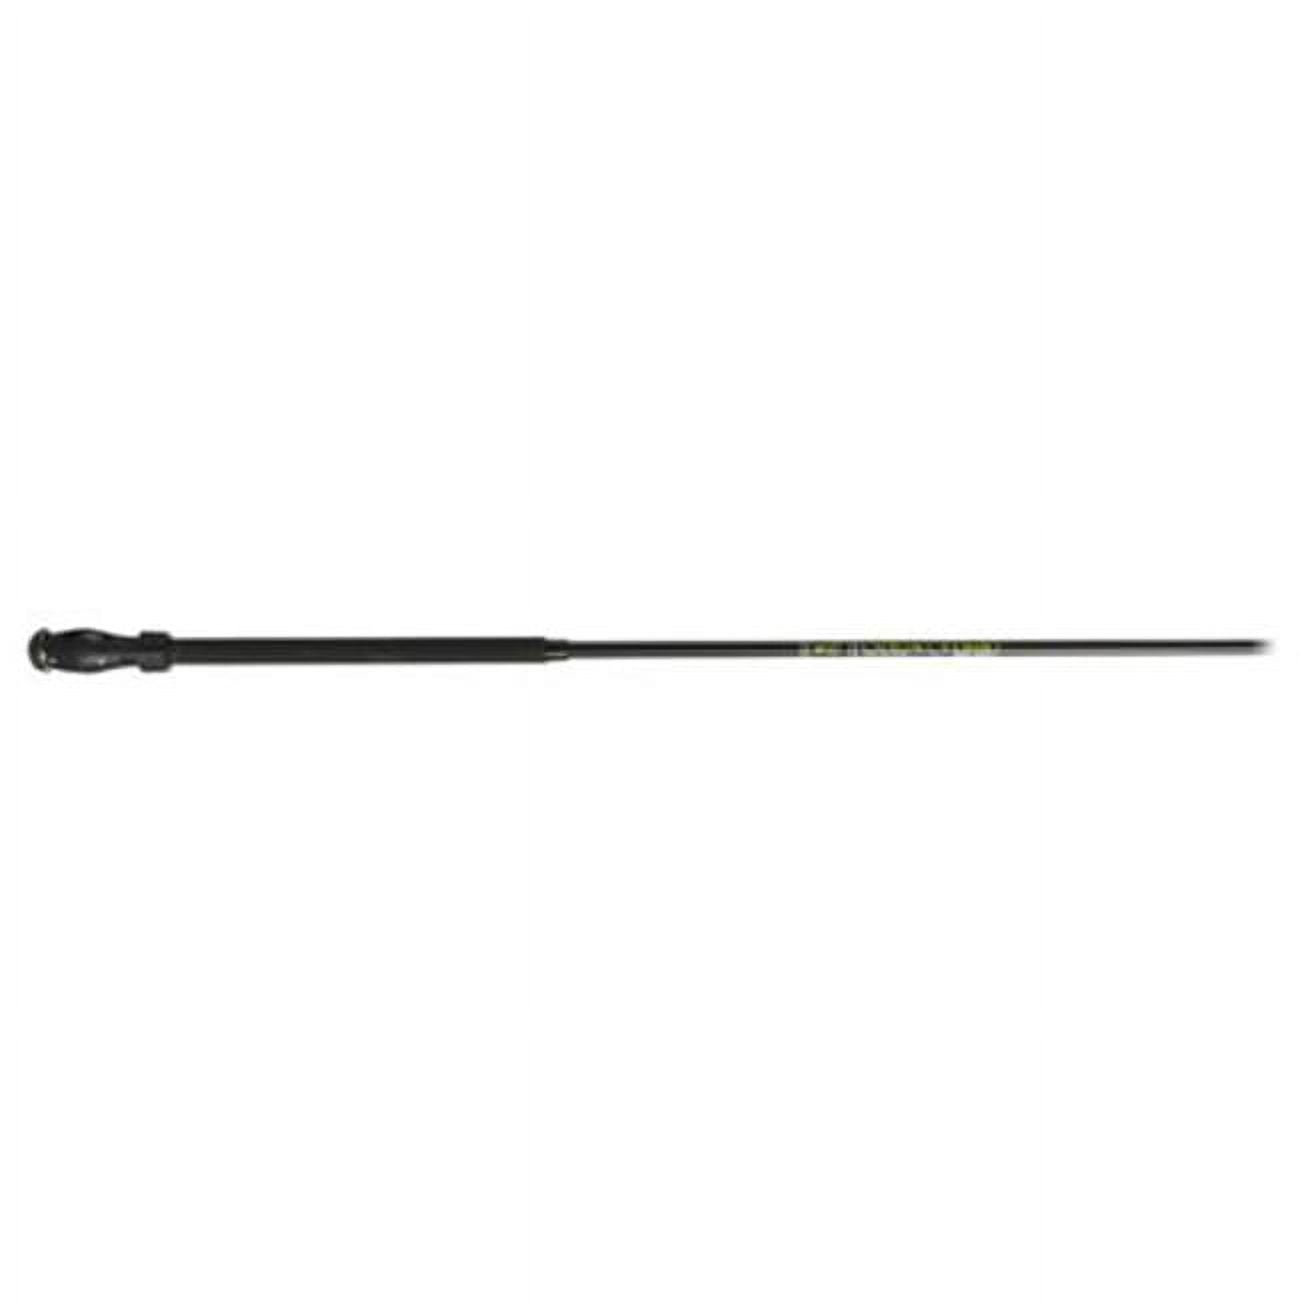 B&M 10517000 Cadillac Telescopic Pole and Line Reel Combo - 10 ft.